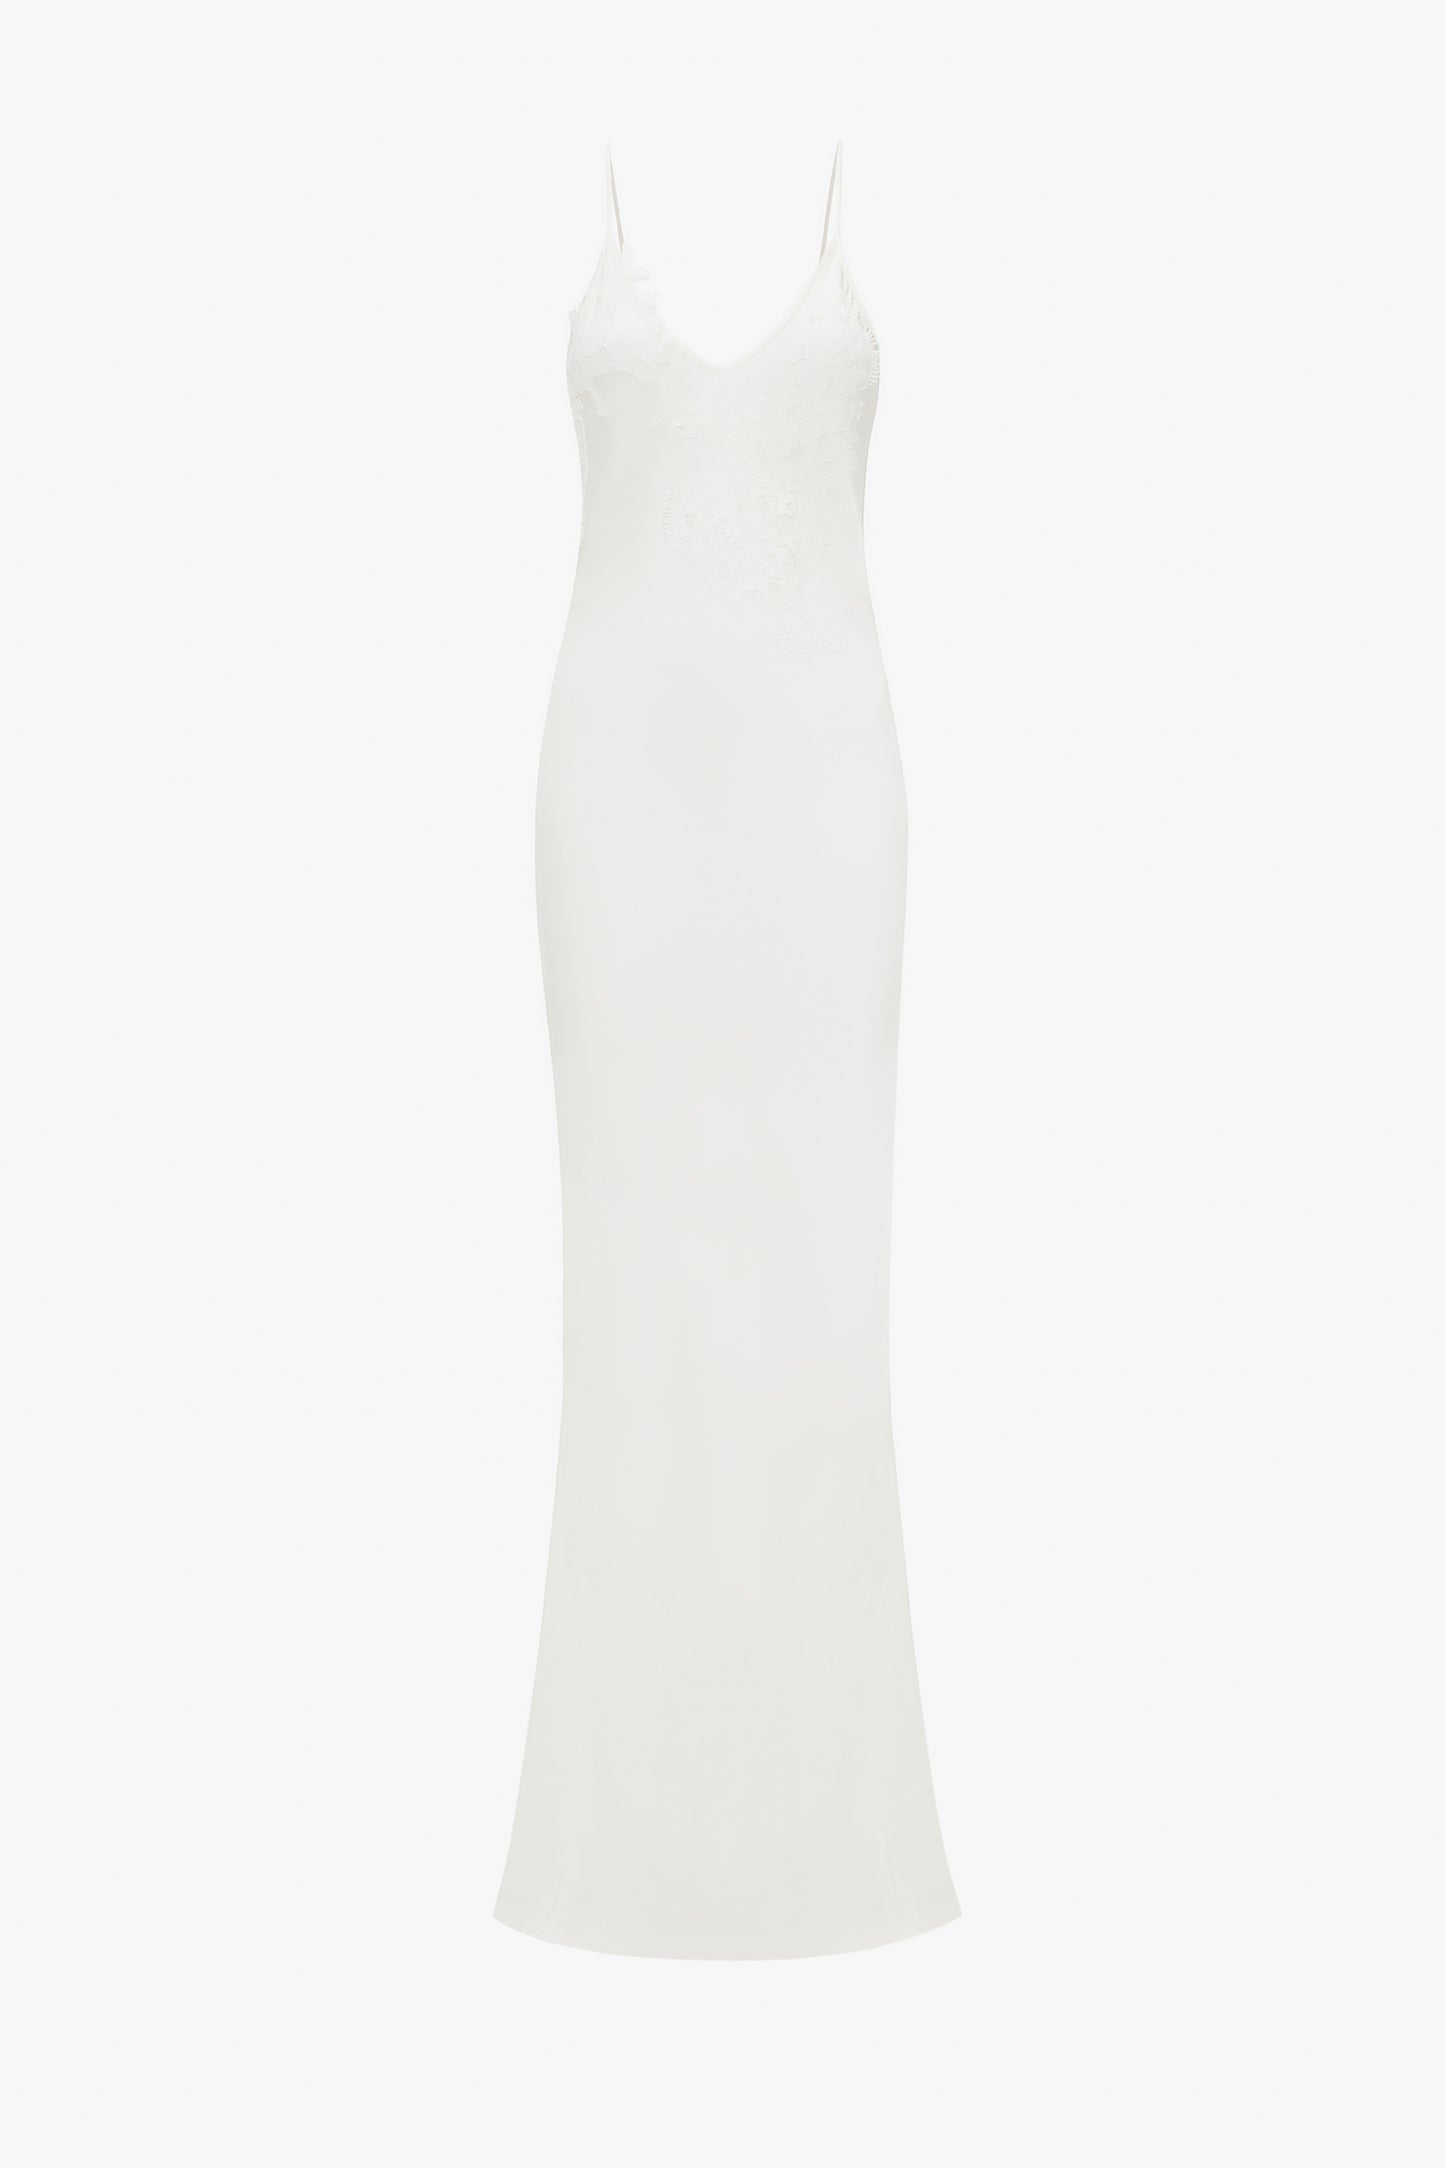 A simple white, sleeveless, slim-fit evening dress with lace detailing on the upper part, displayed against a white background. 
would become:
An Exclusive Lace Detail Floor-Length Cami Dress In Ivory by Victoria Beckham, displayed against a white background.